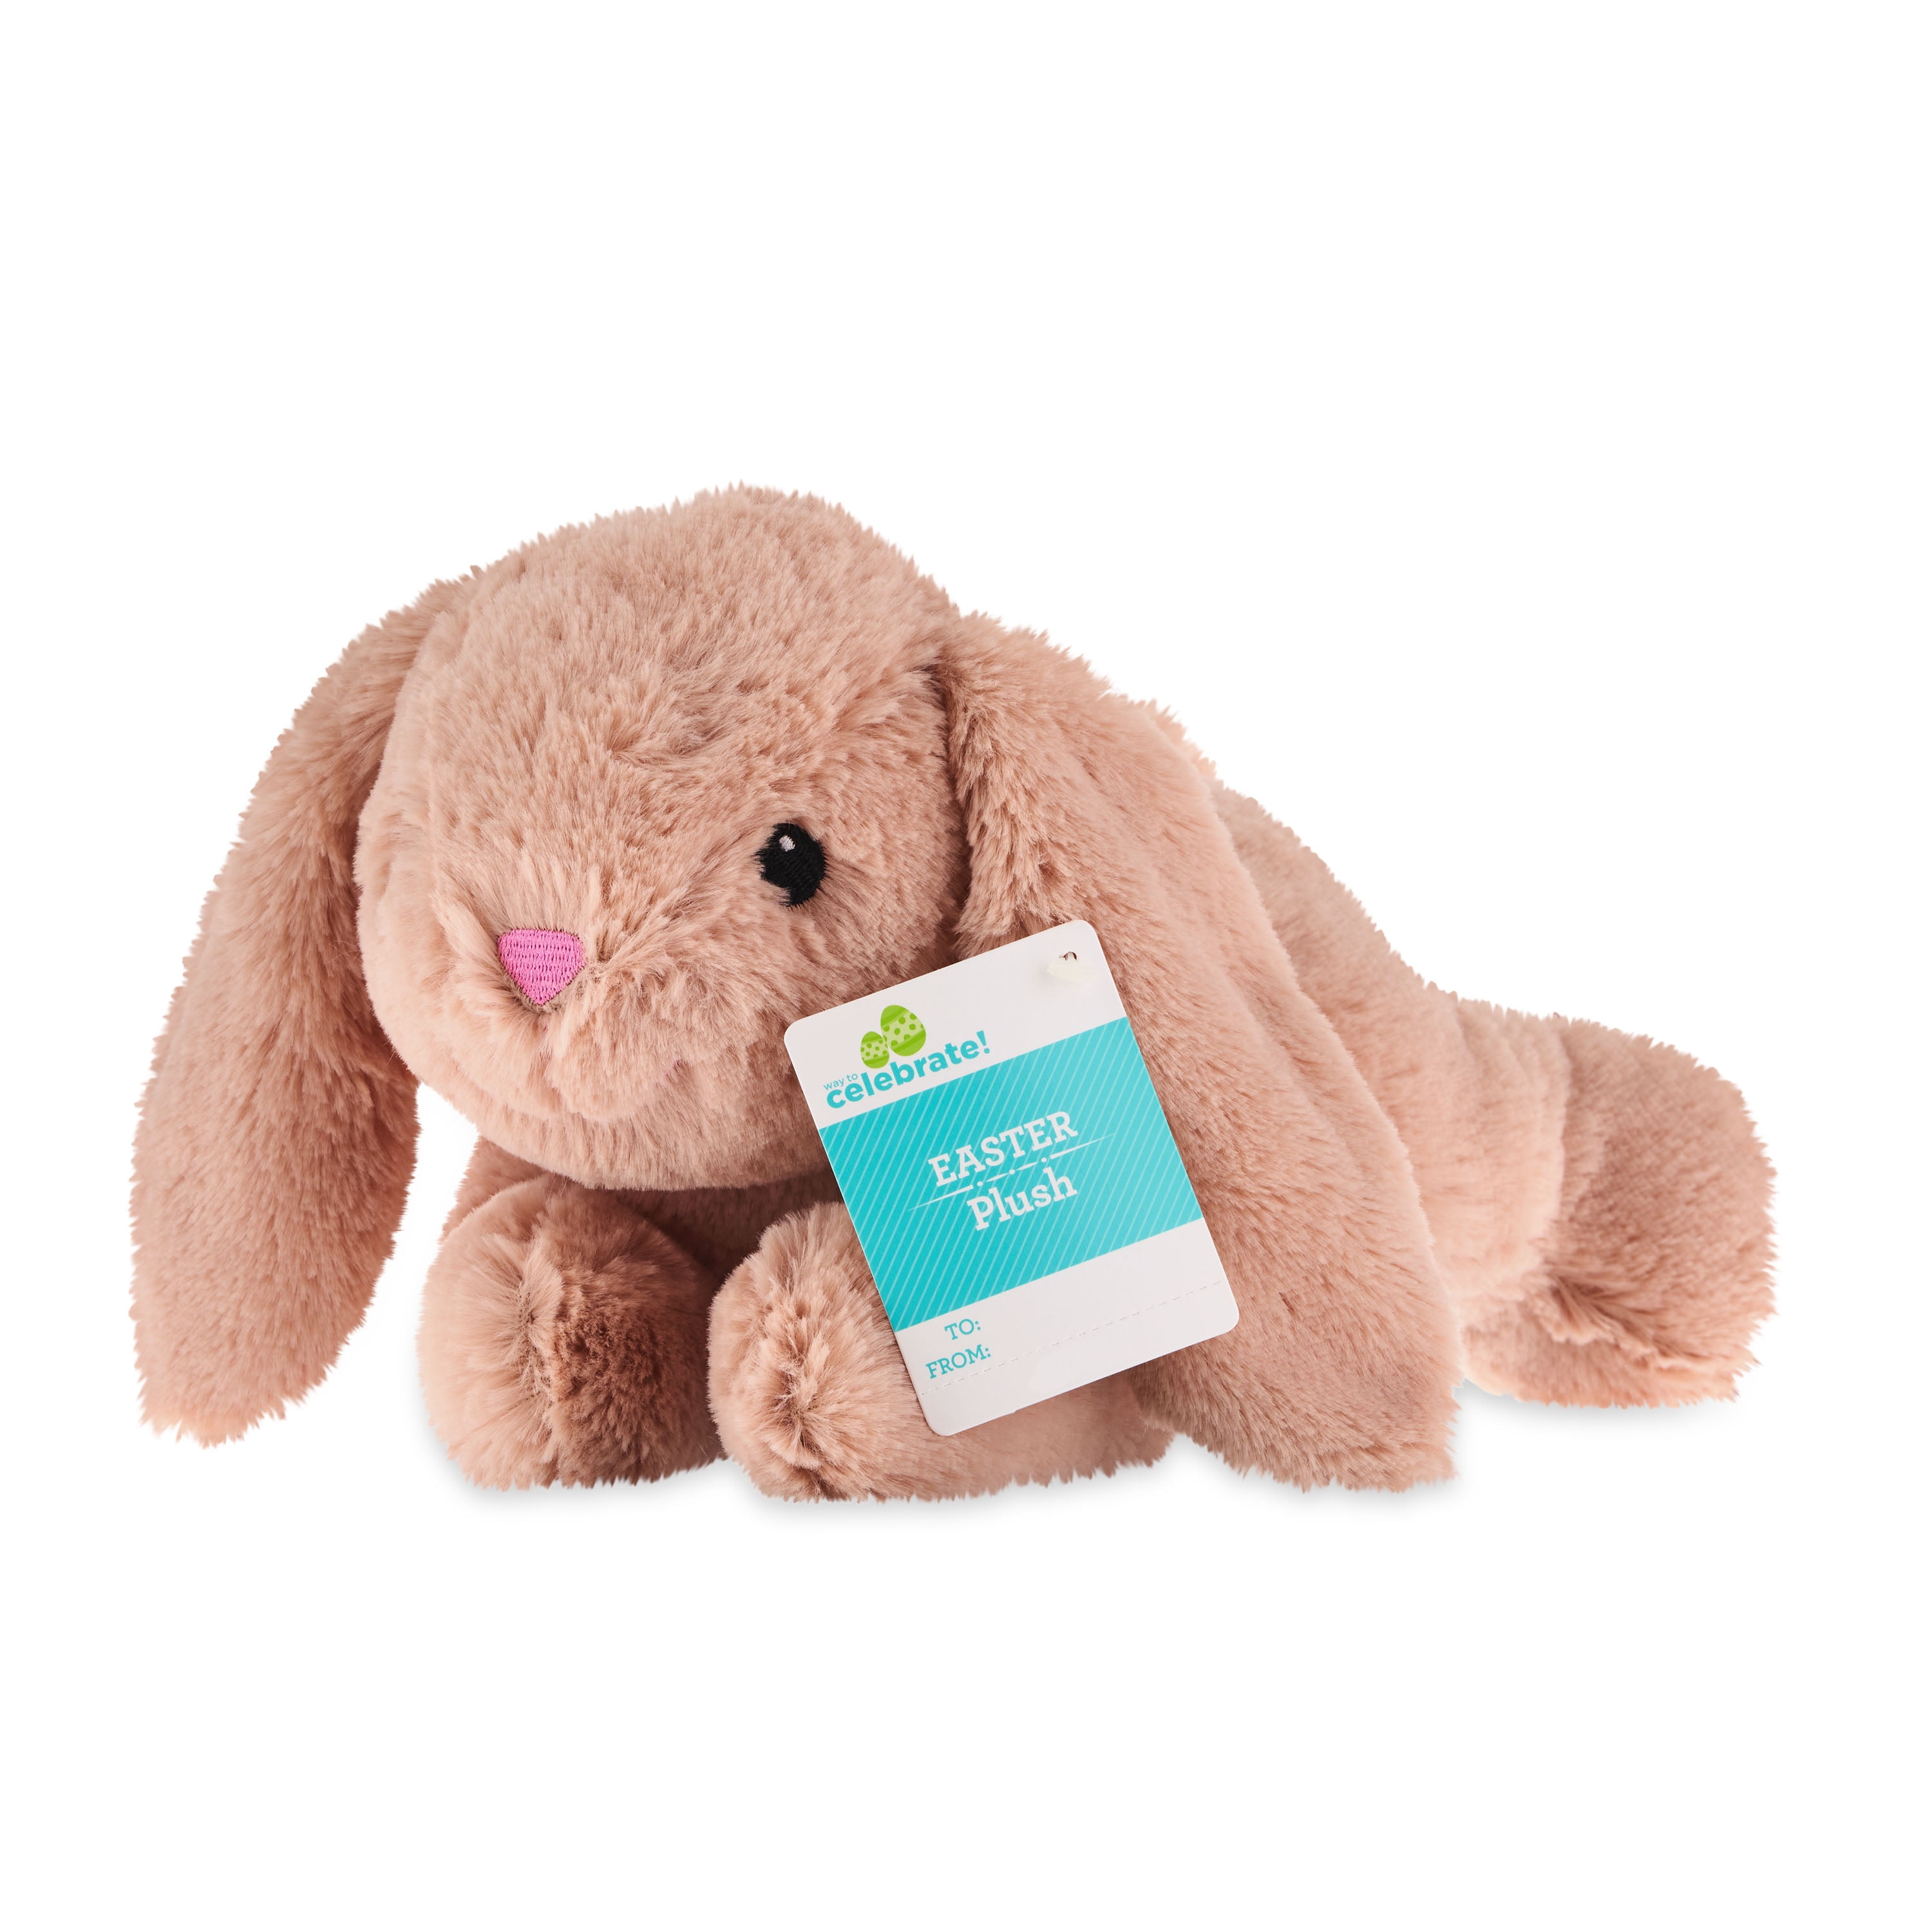 Way to Celebrate! Easter Floppy Bunny Plush Toy, Pink​ 